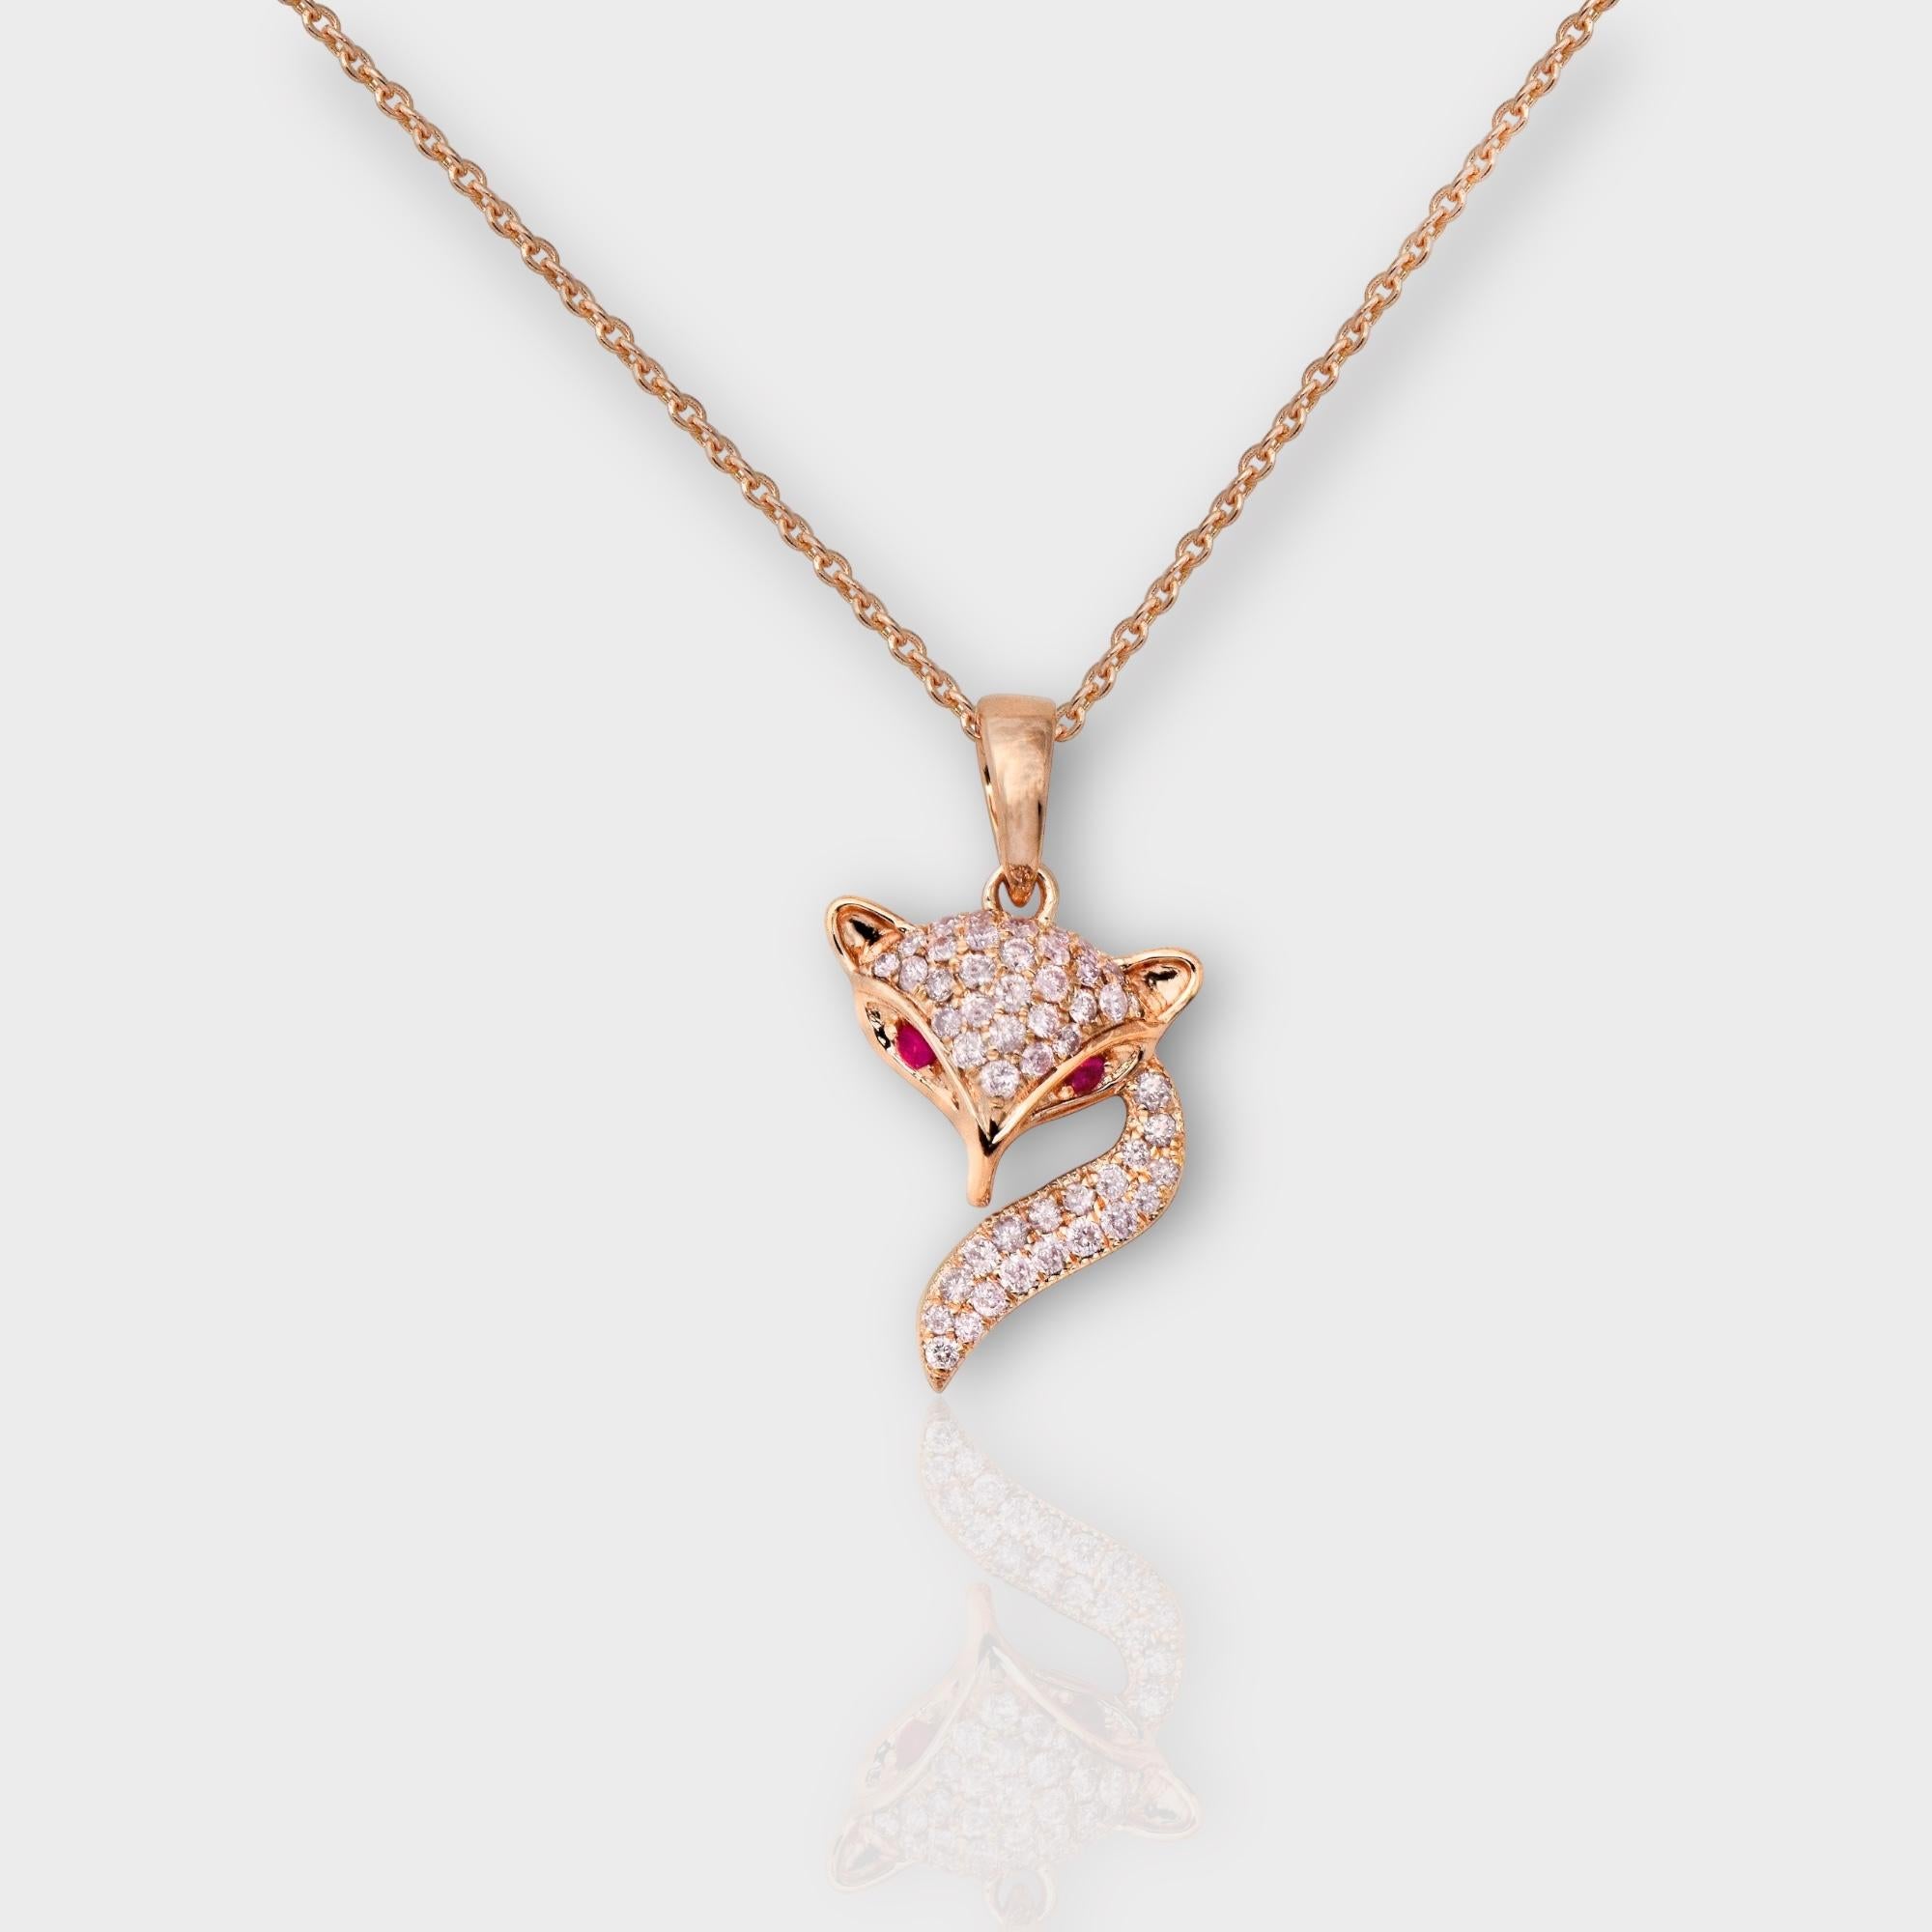 IGI 14K 0.36 ct Natural Pink Diamonds Fox Design Pendant Necklace In New Condition For Sale In Kaohsiung City, TW